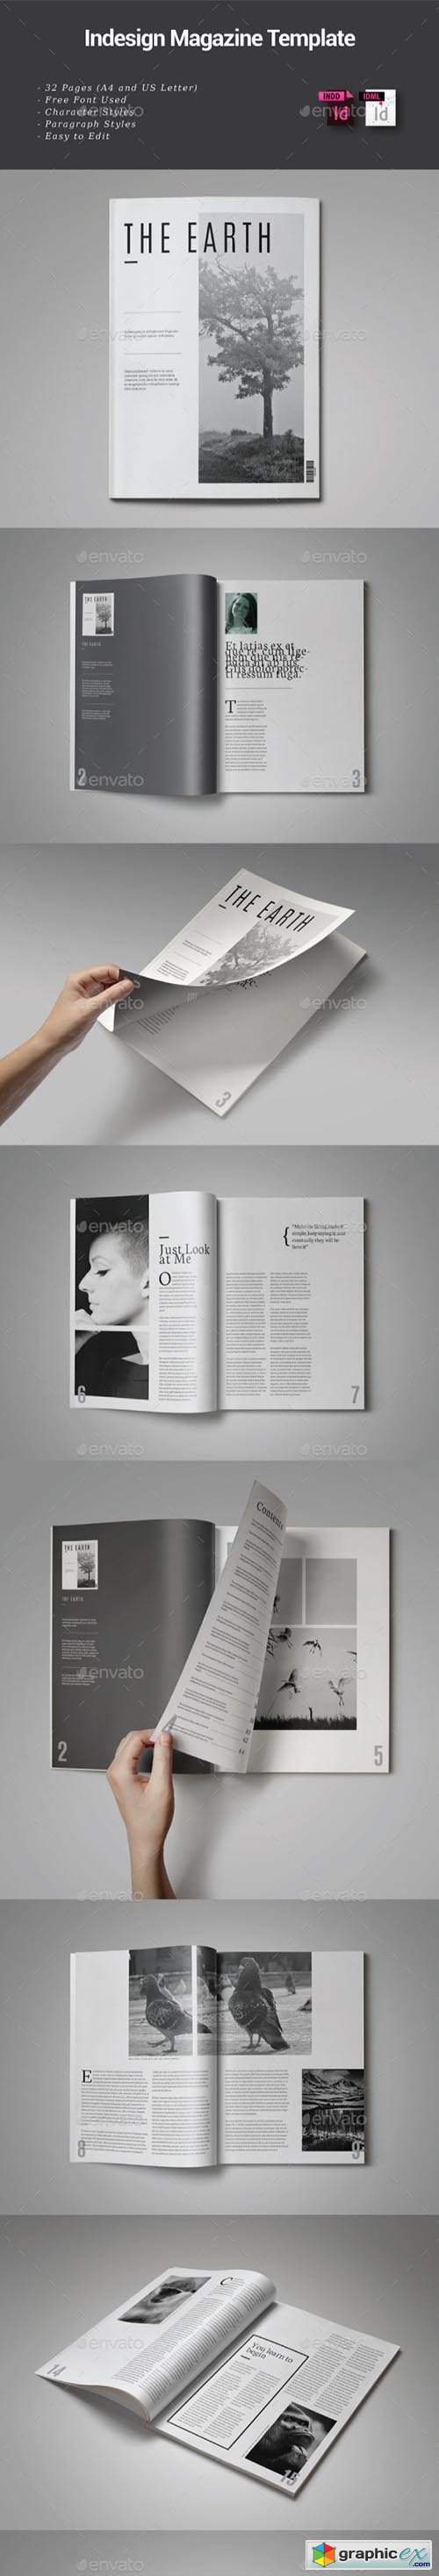 32 Pages Indesign Magazine Template